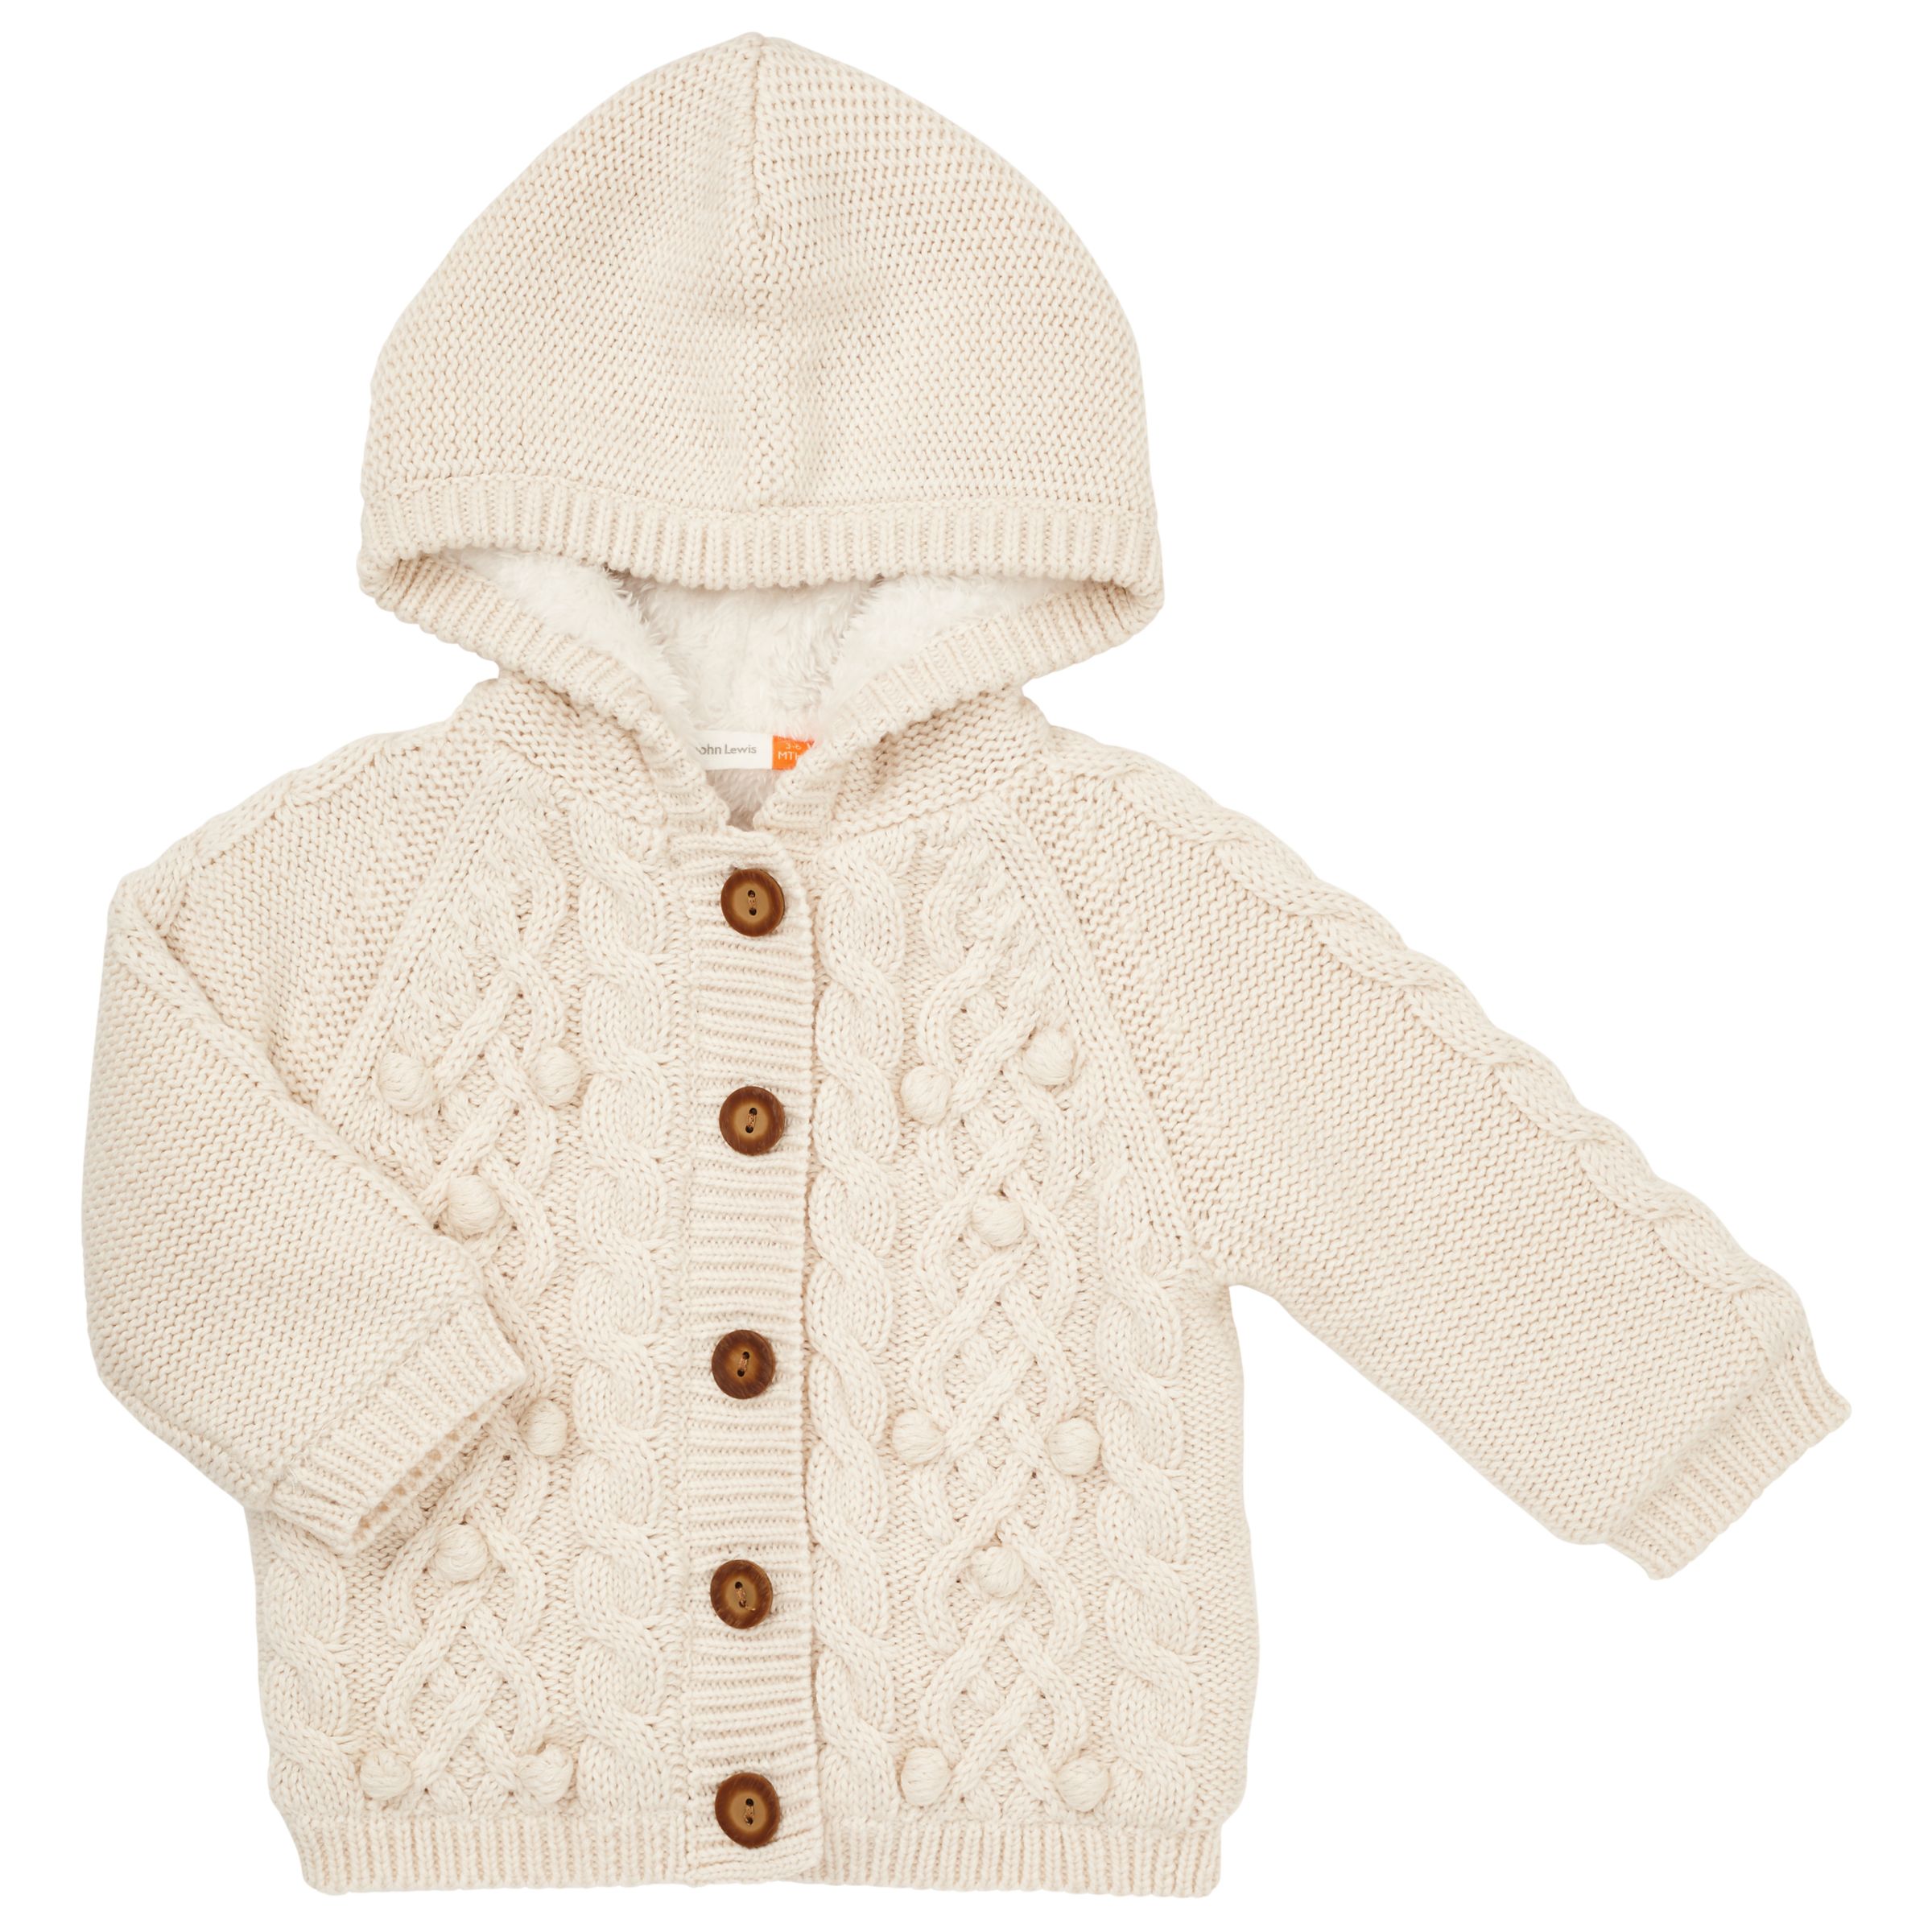 John Lewis & Partners Baby Cable Knit Hooded Cardigan, Cream